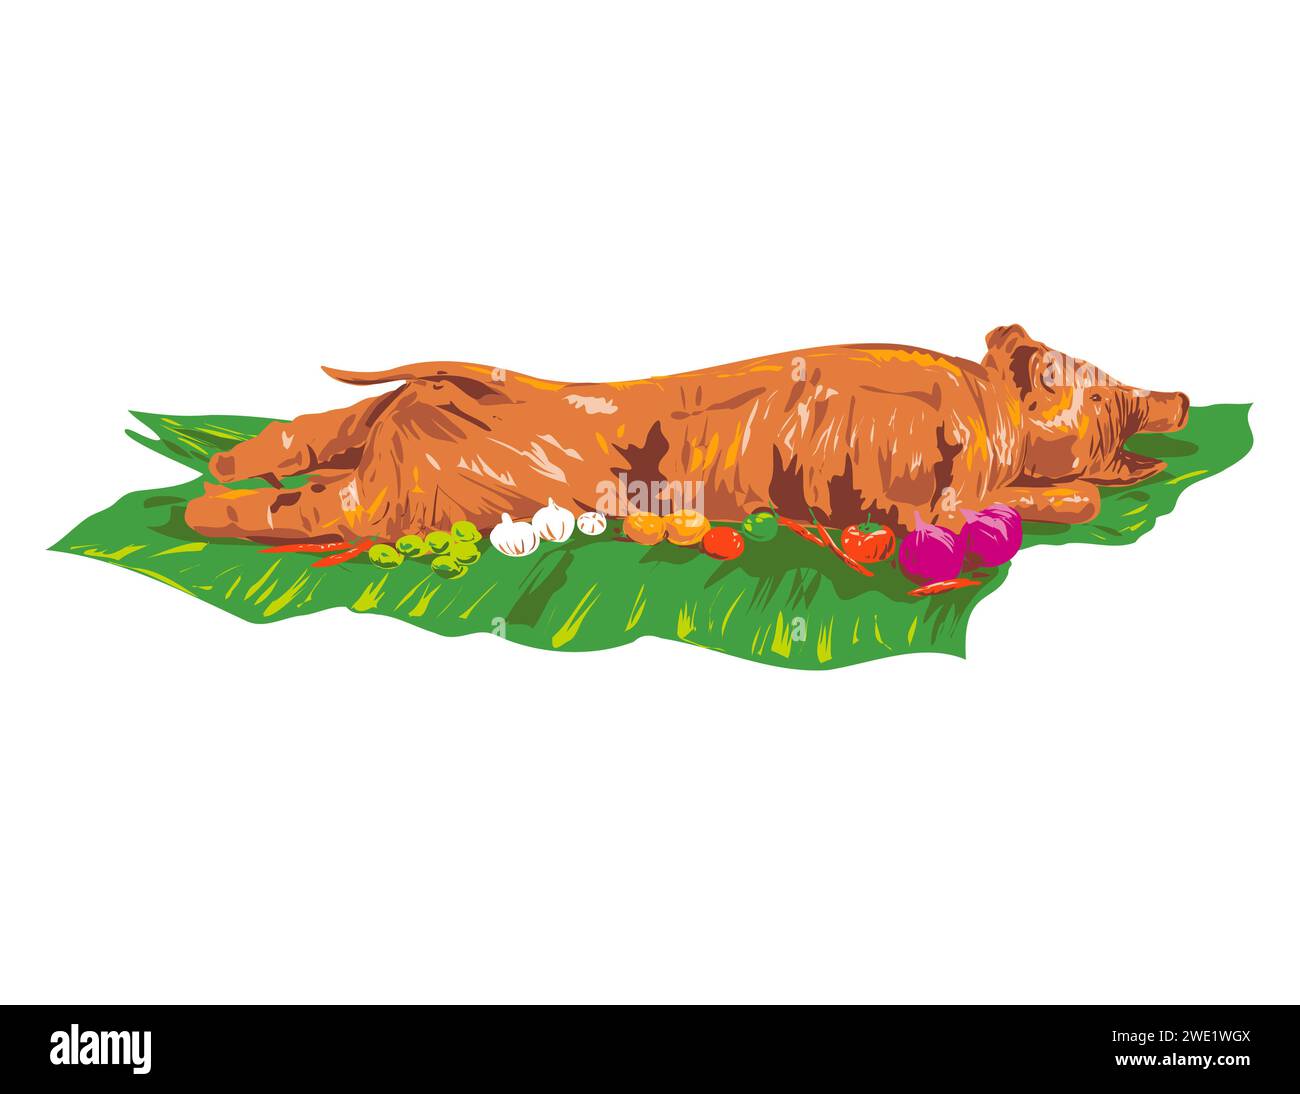 Art Deco or WPA poster art of a lechon, litson  or roasted suckling pig on isolated background done in works project administration style. Stock Photo